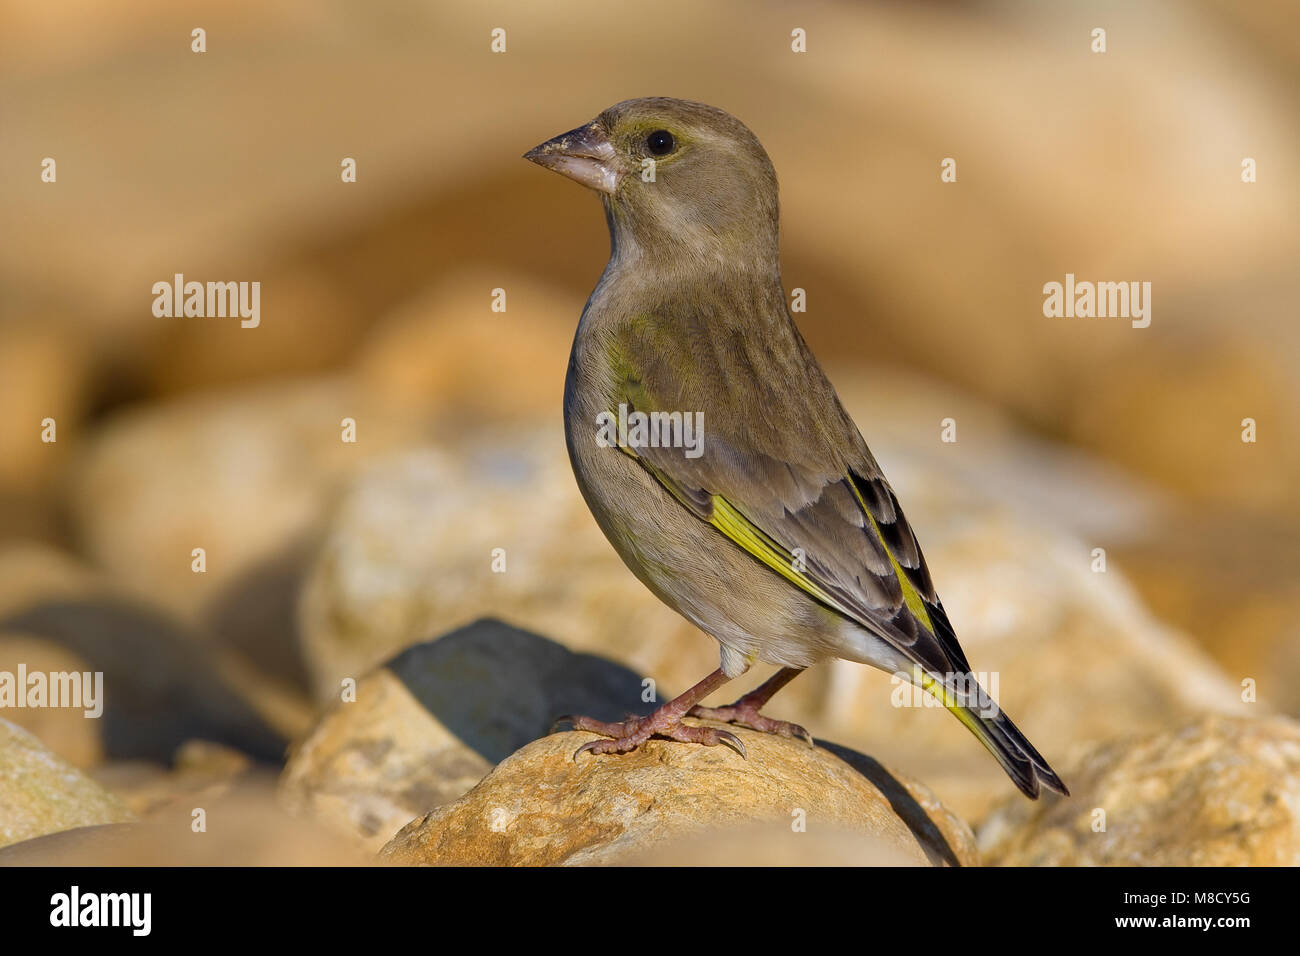 Vrouwtje Groenling op steen; Female European Greenfinch perched on a rock Stock Photo